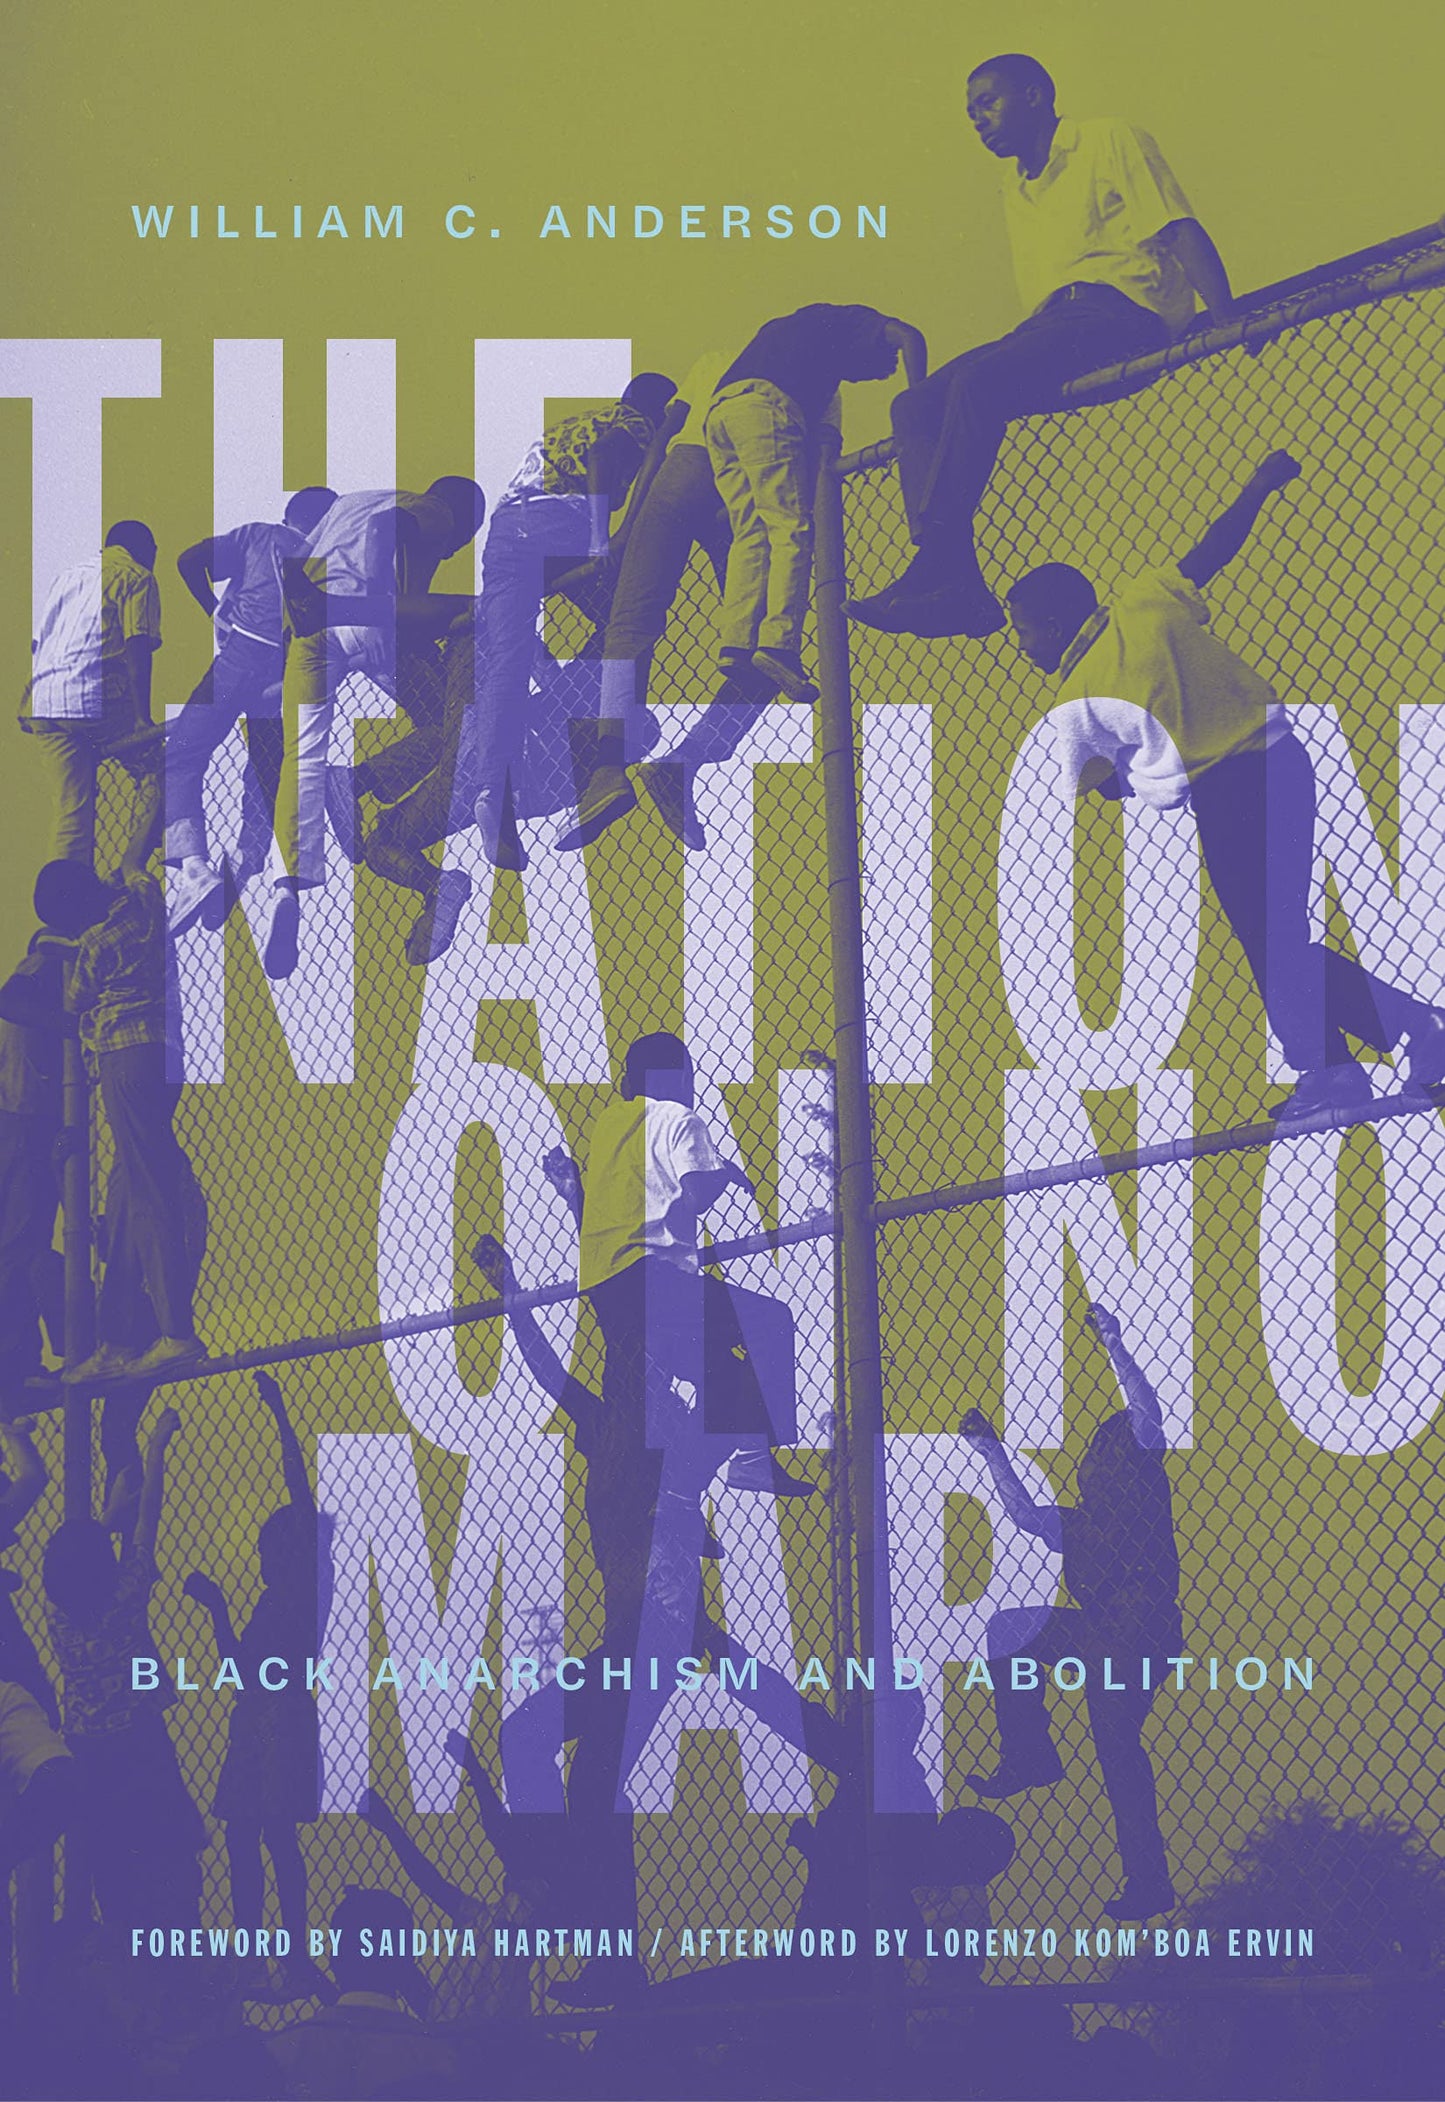 The Nation on No Map: Black Anarchism and Abolition, by William C. Anderson